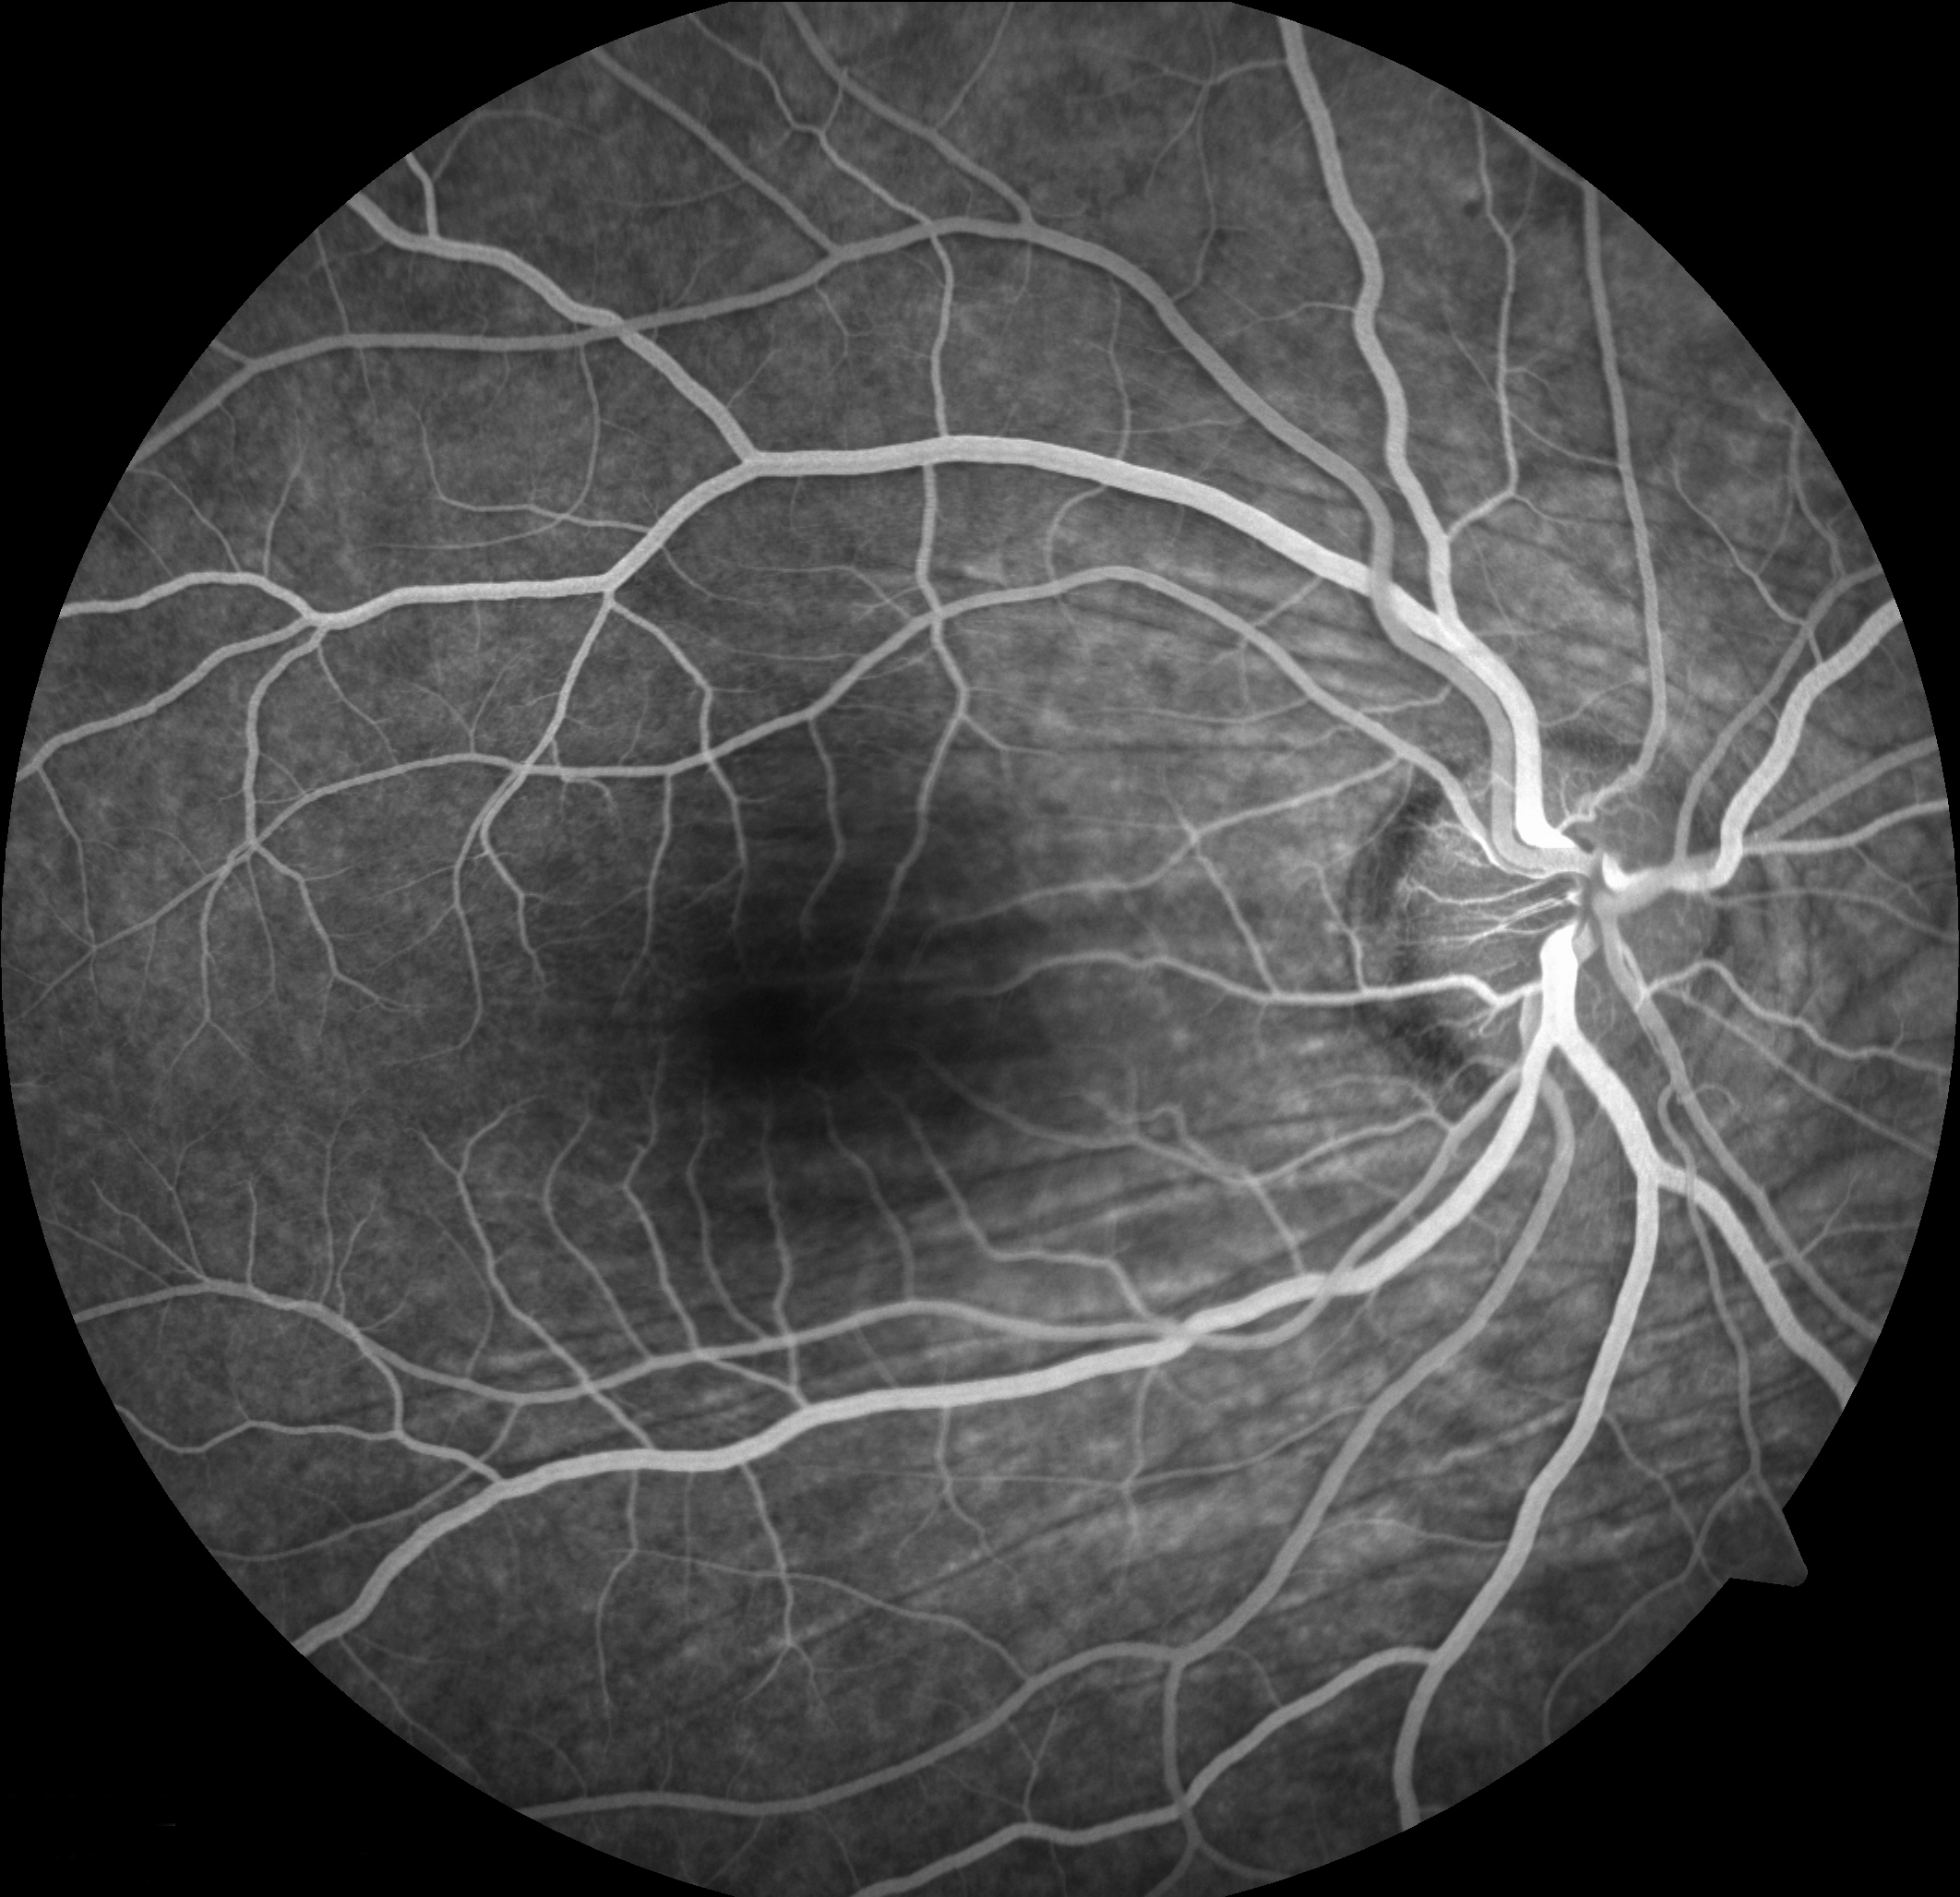 Figure 2.3.6 Choroidal Folds Visible on Fluorescein Angiography